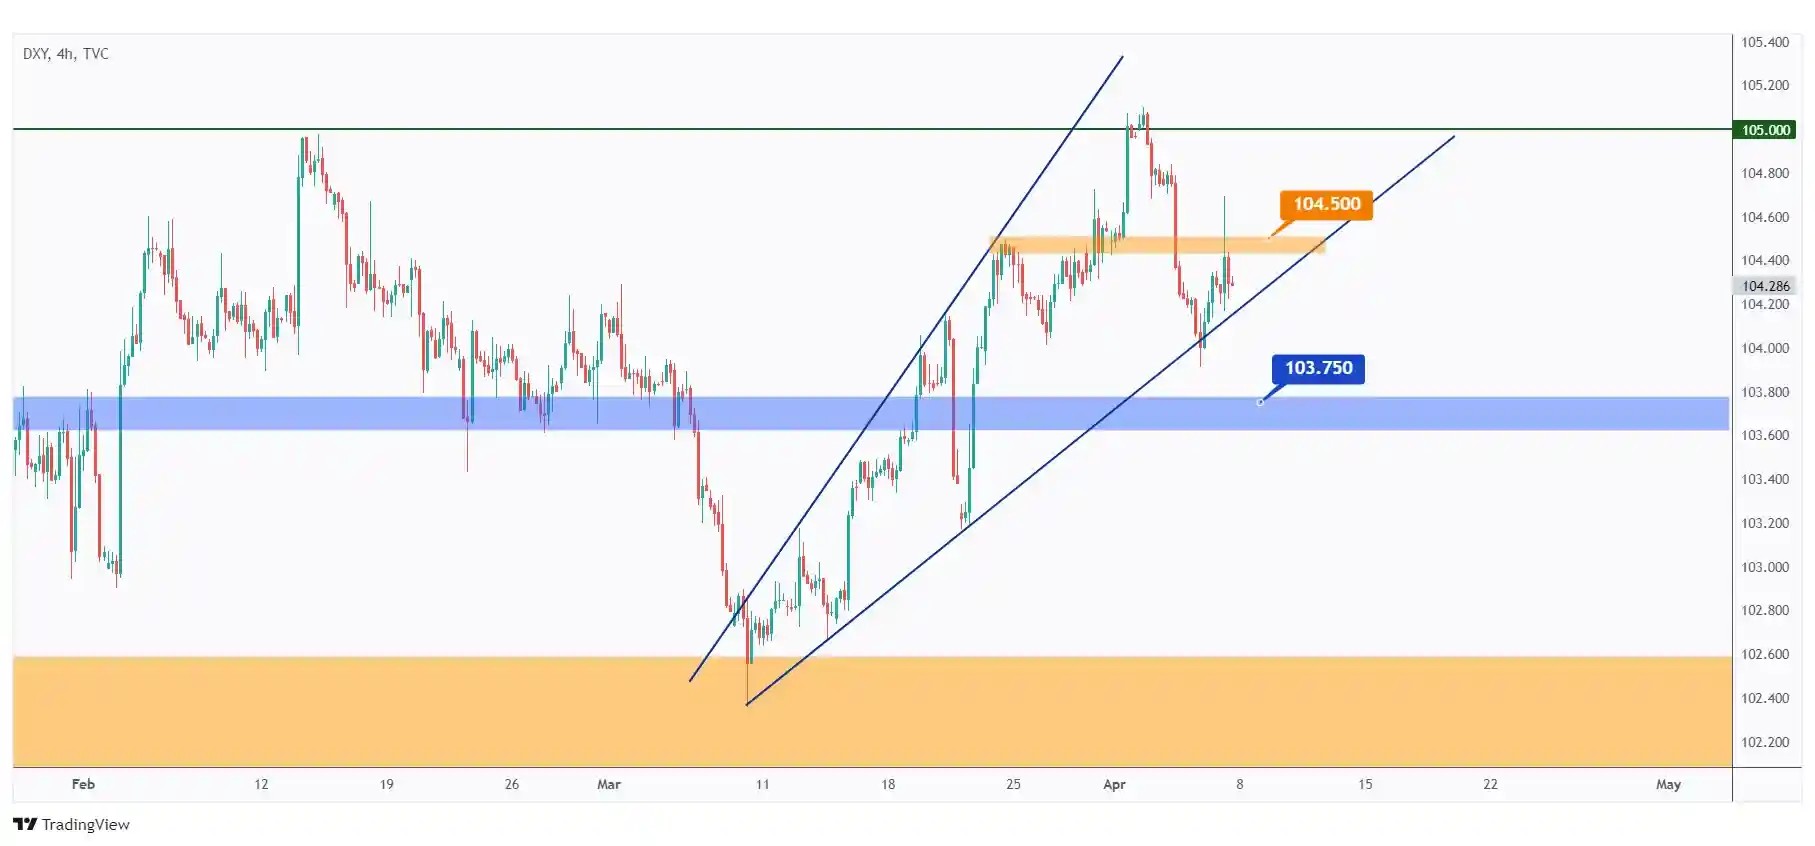 DXY 4H chart overall bullish trading within the rising wedge in blue.